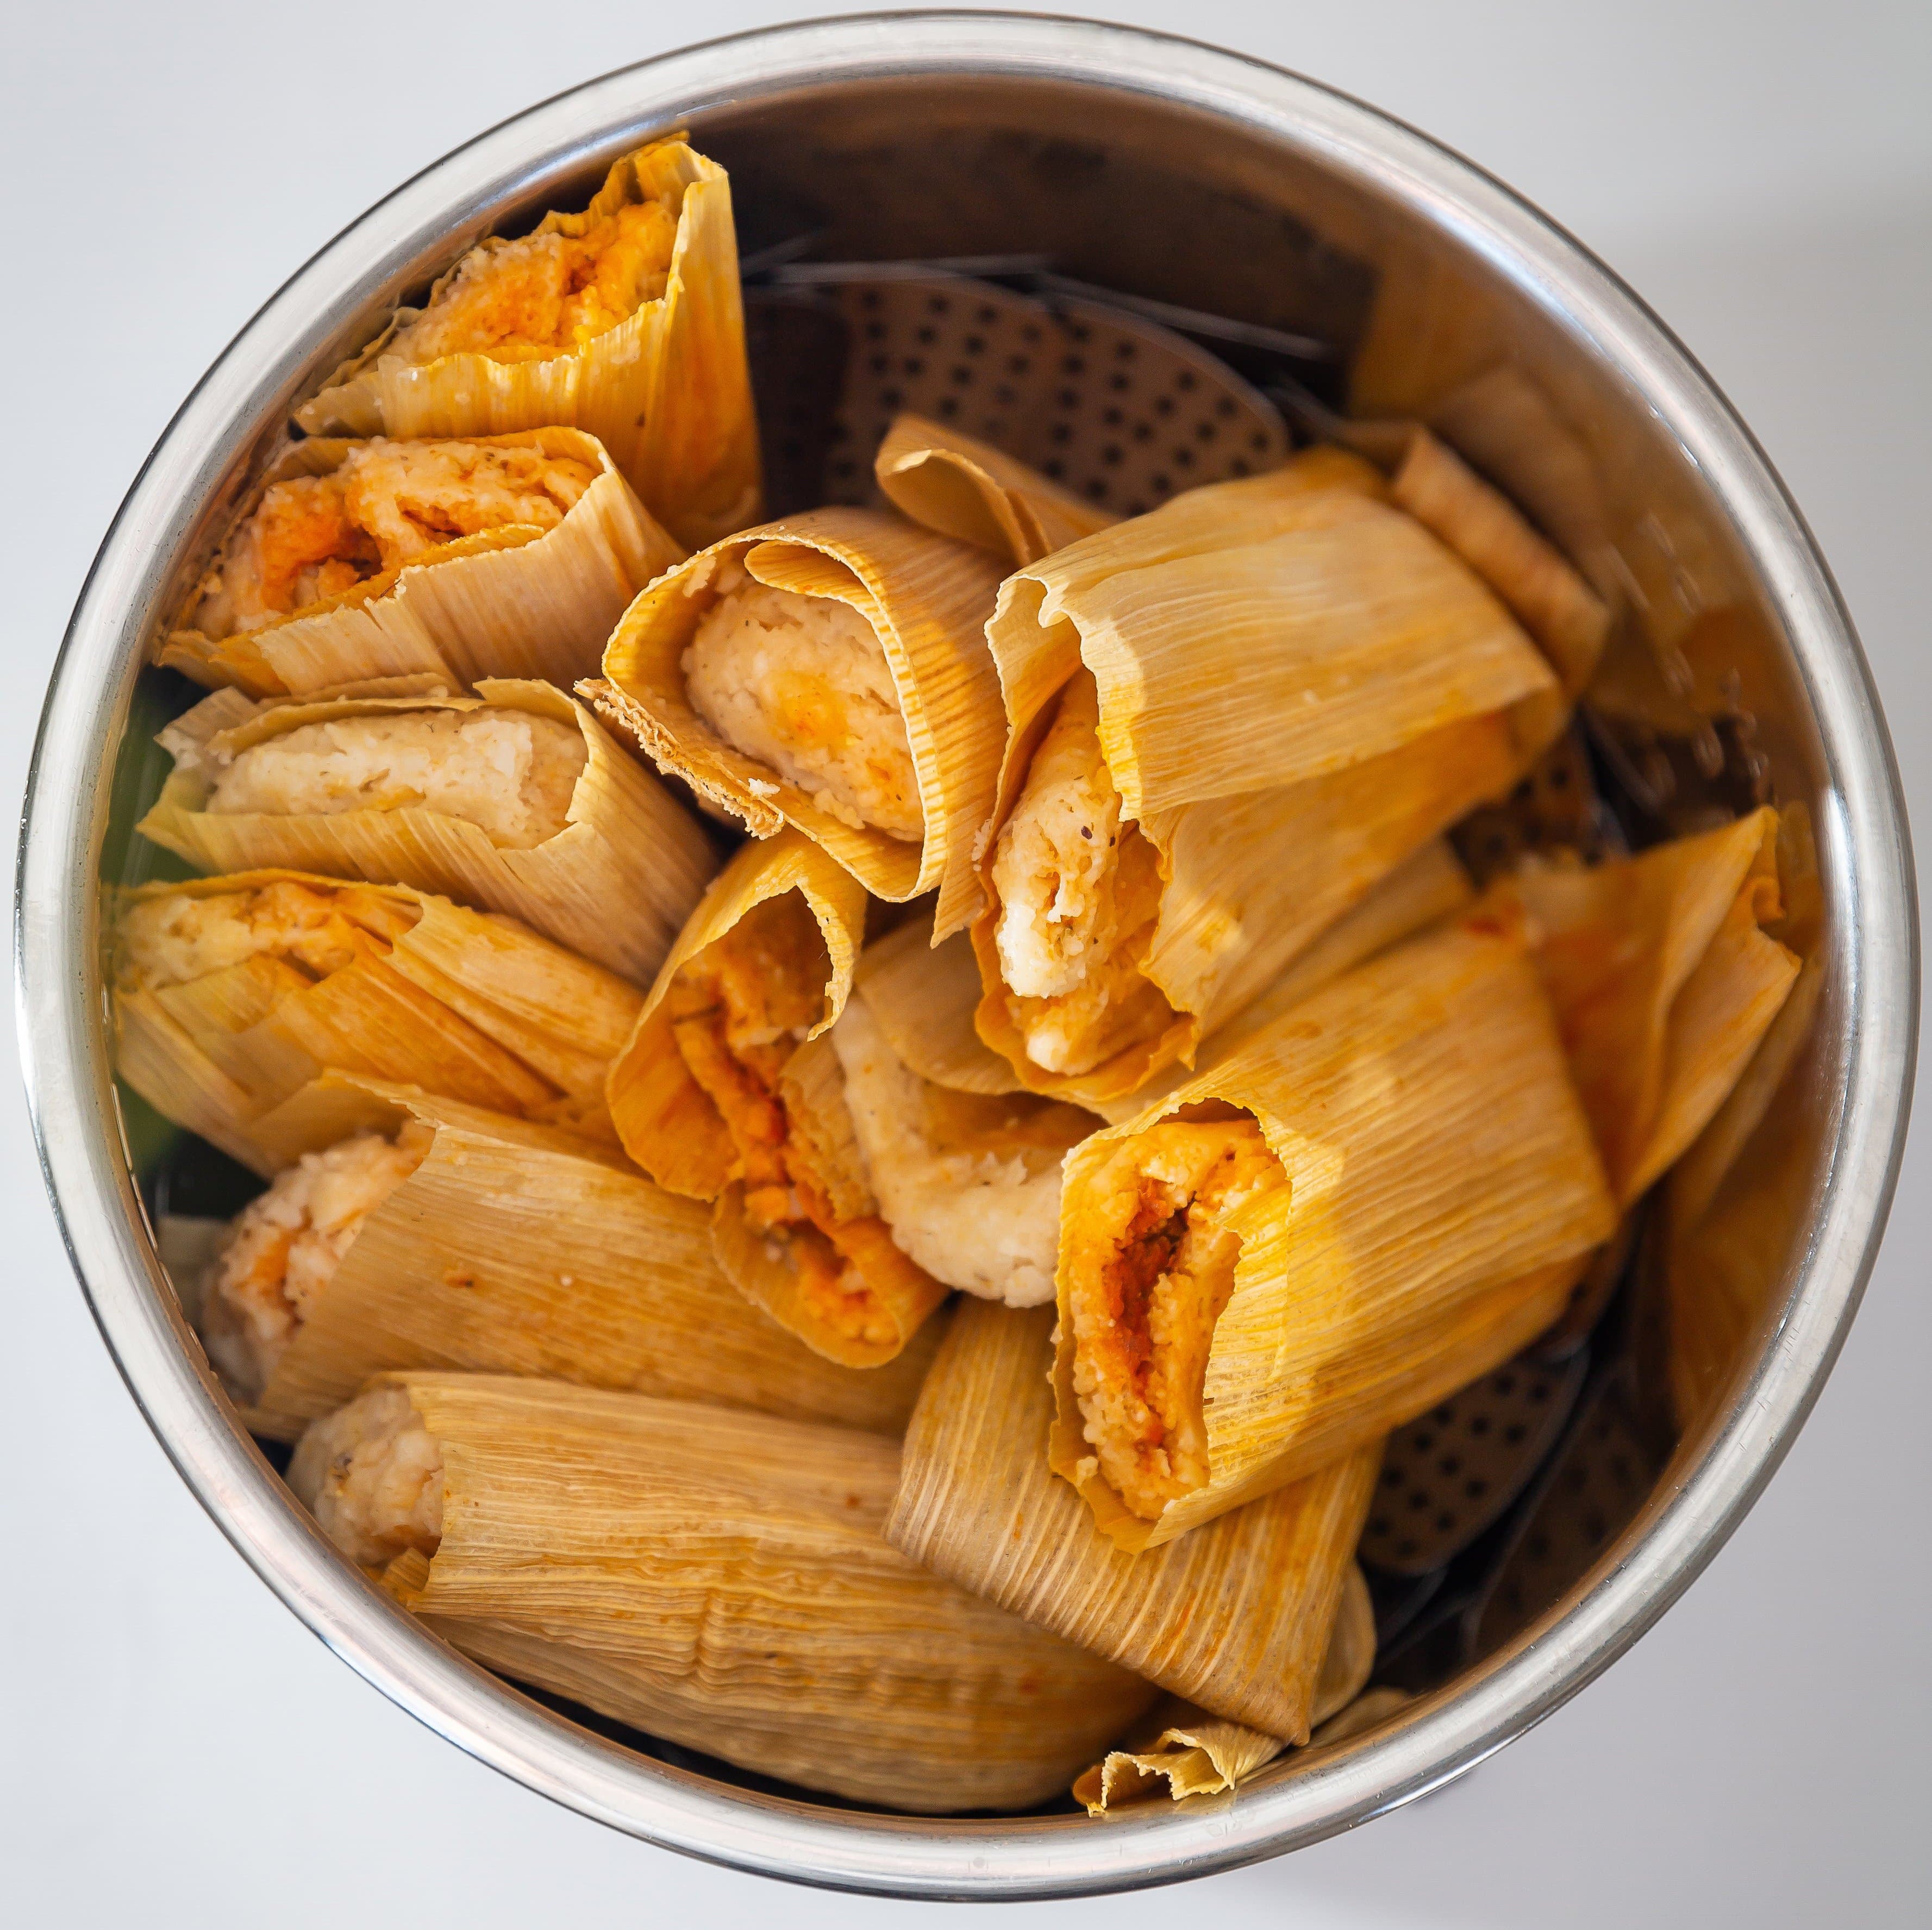 A steamer basket filled with freshly steamed Hatch Red Chile Pork Tamales, some unwrapped at the top revealing the masa and shredded pork filling.